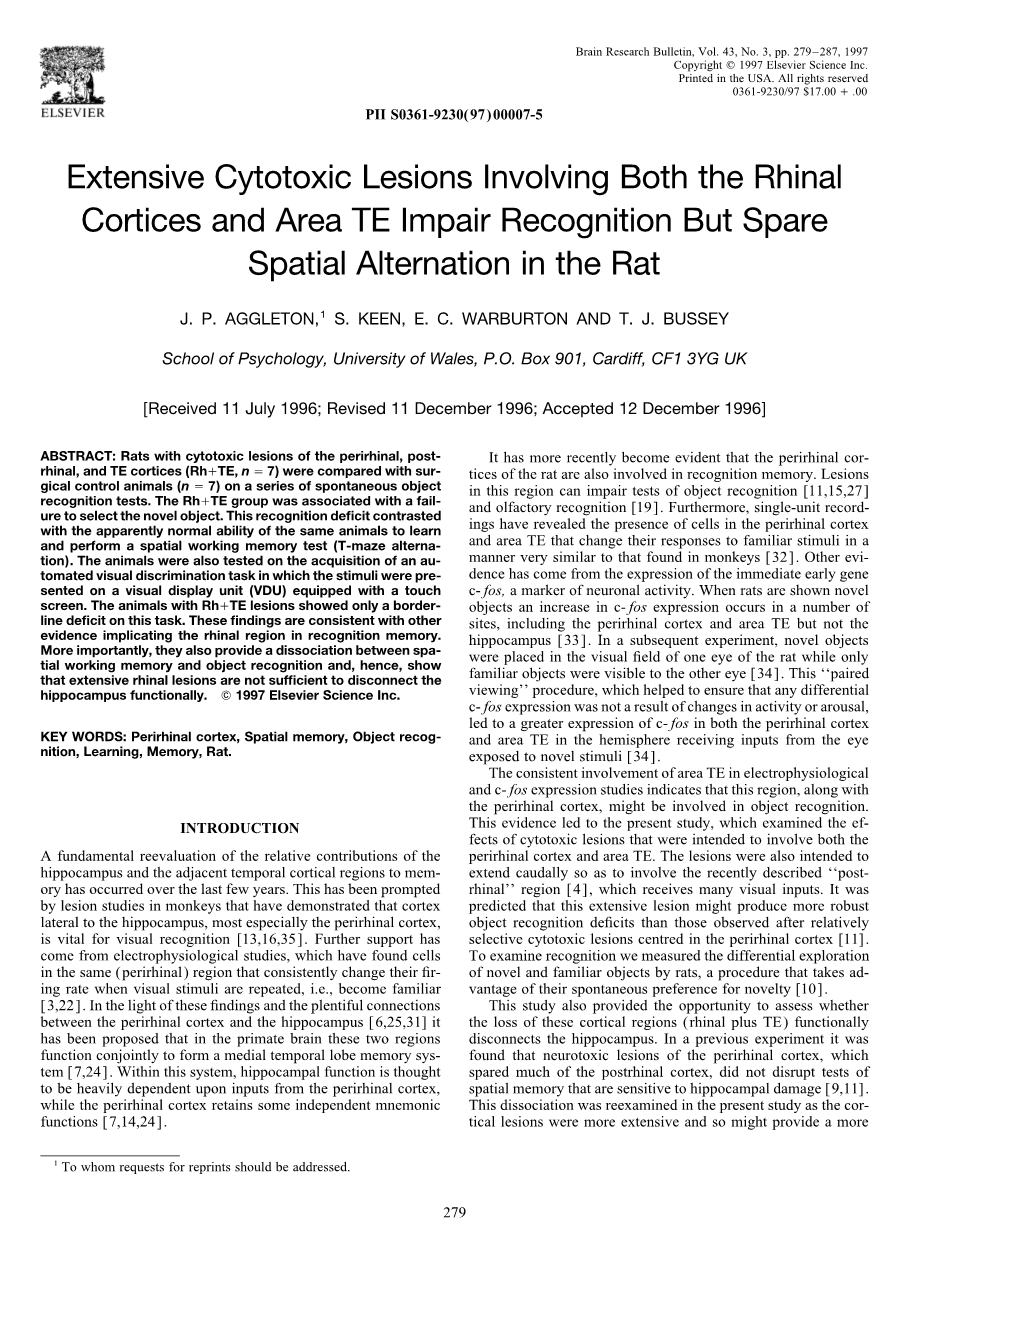 Extensive Cytotoxic Lesions Involving Both the Rhinal Cortices and Area TE Impair Recognition but Spare Spatial Alternation in the Rat